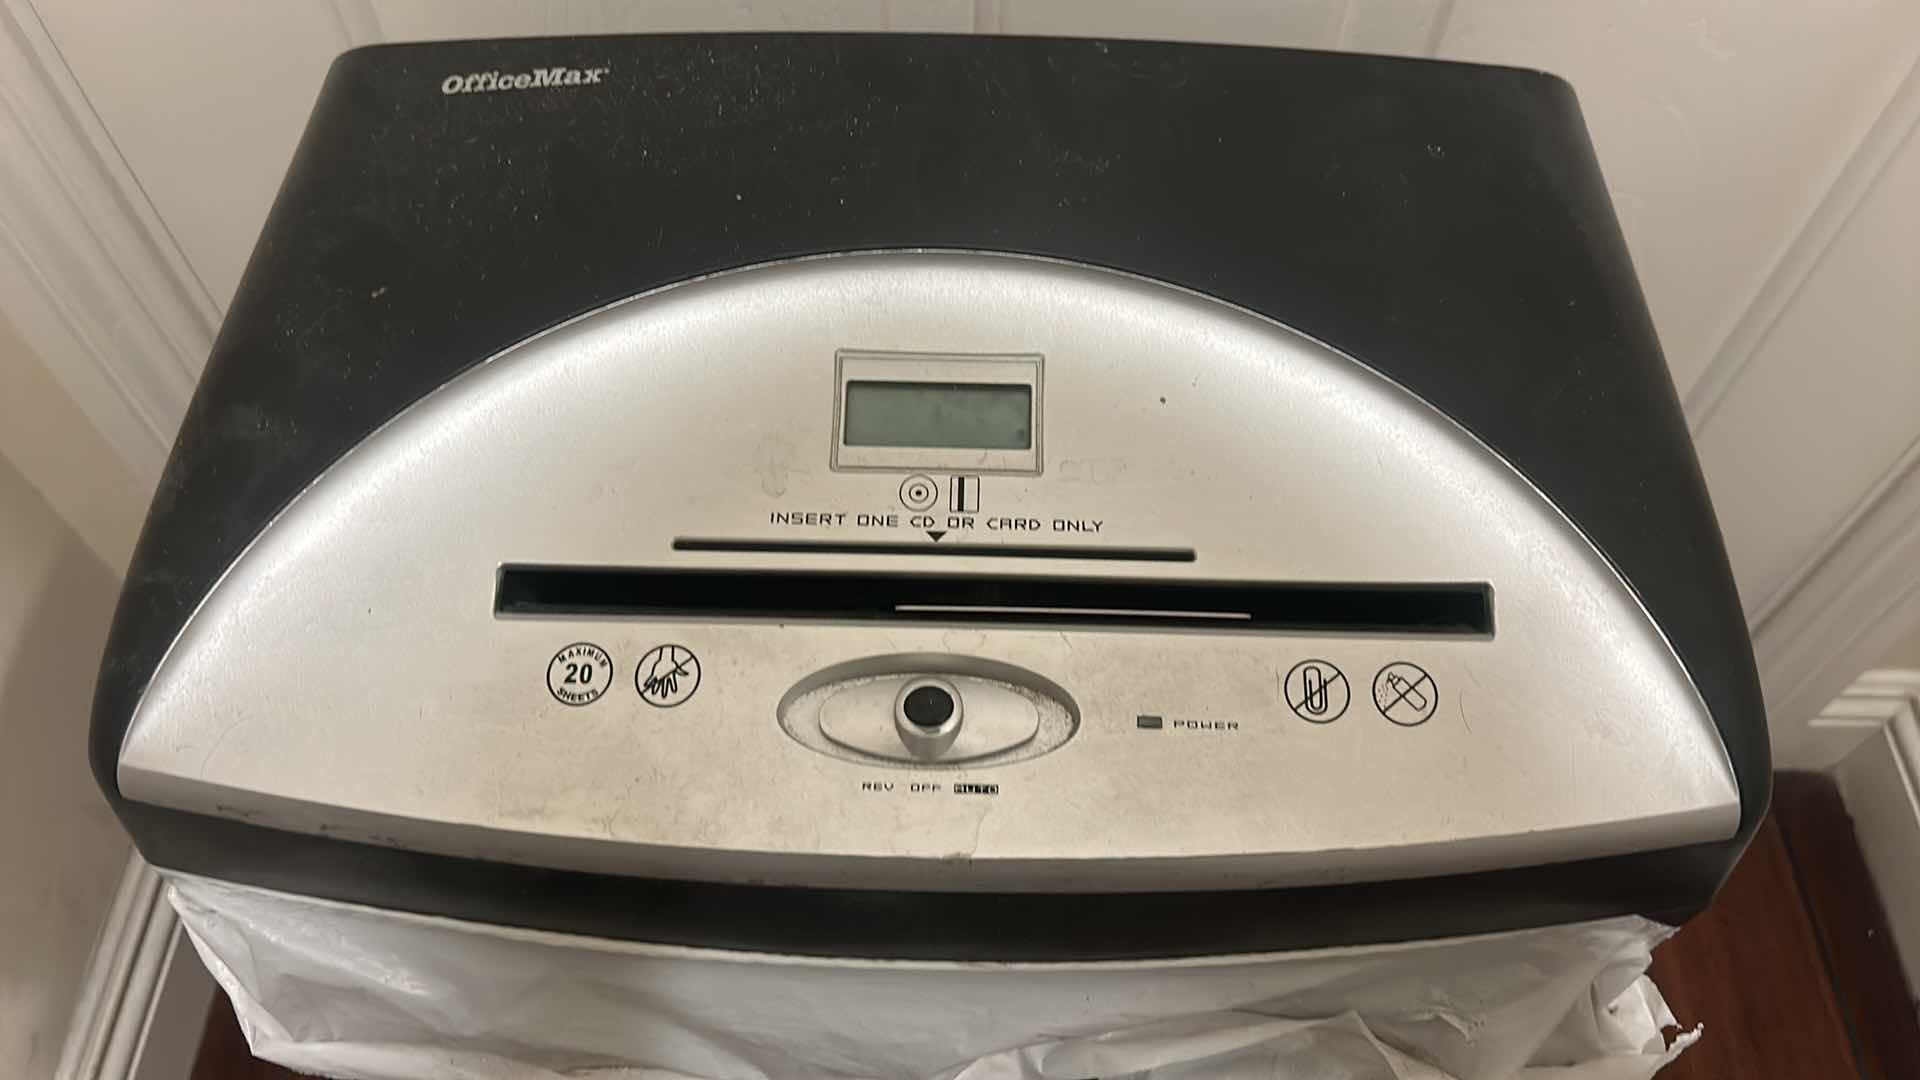 Photo 2 of LARGE OFFICE MAX SHREDDER